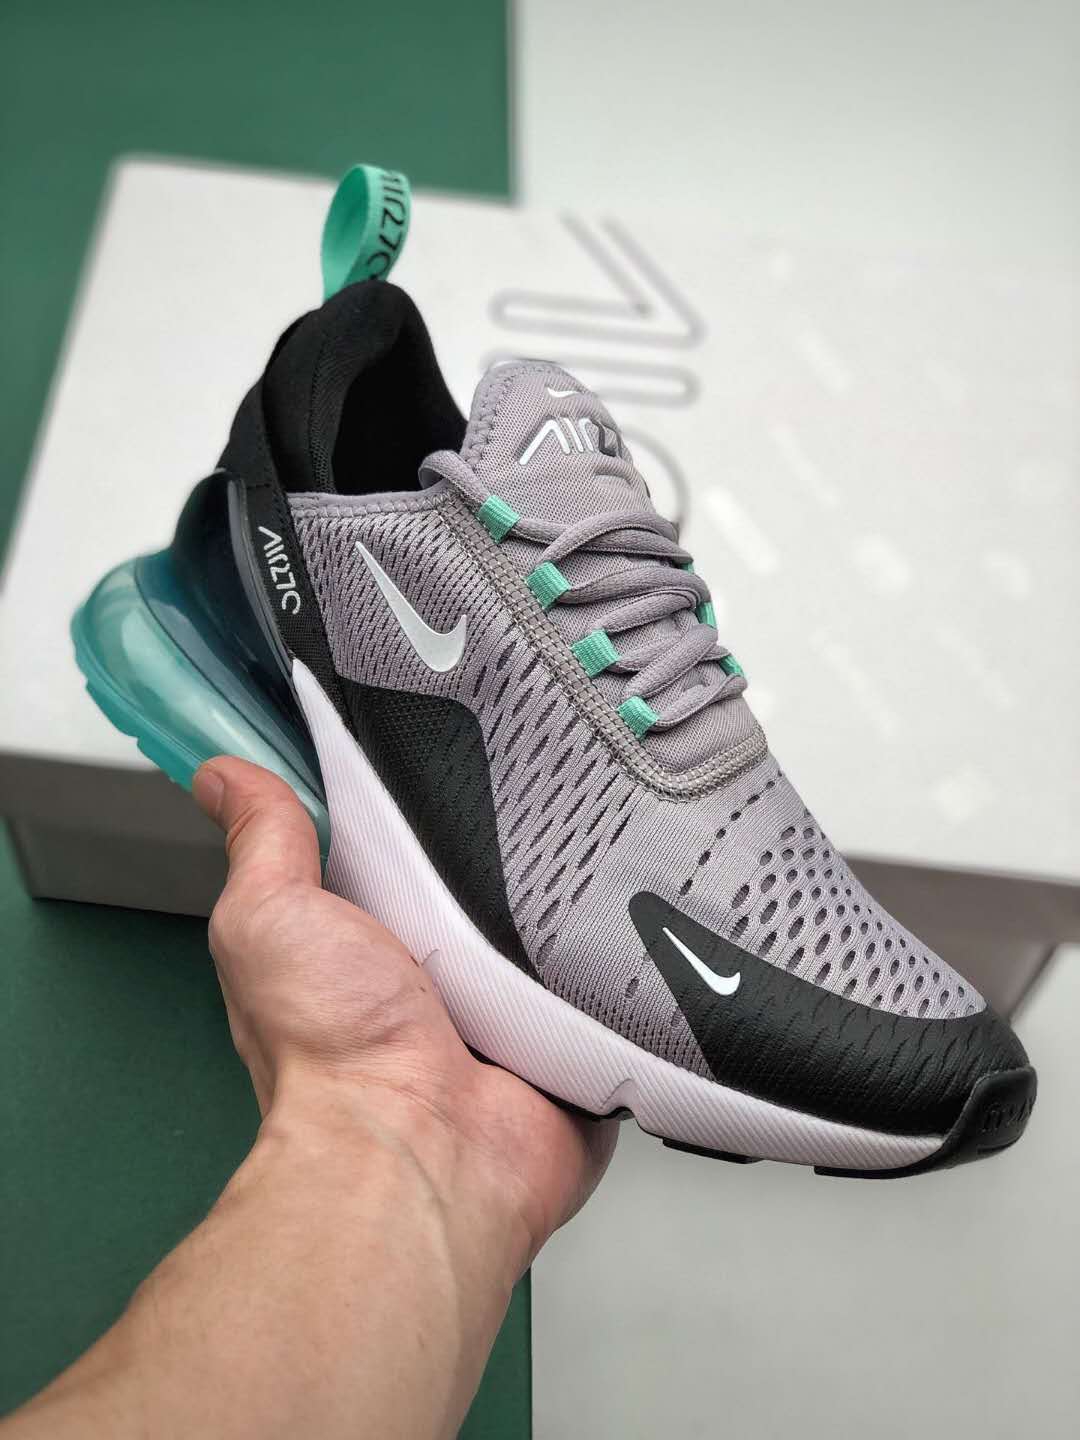 Nike Air Max 270 Fresh Mint Atmosphere Grey Black White CJ0520-001 - Stylish and Comfortable Sneakers | Shop Online Now